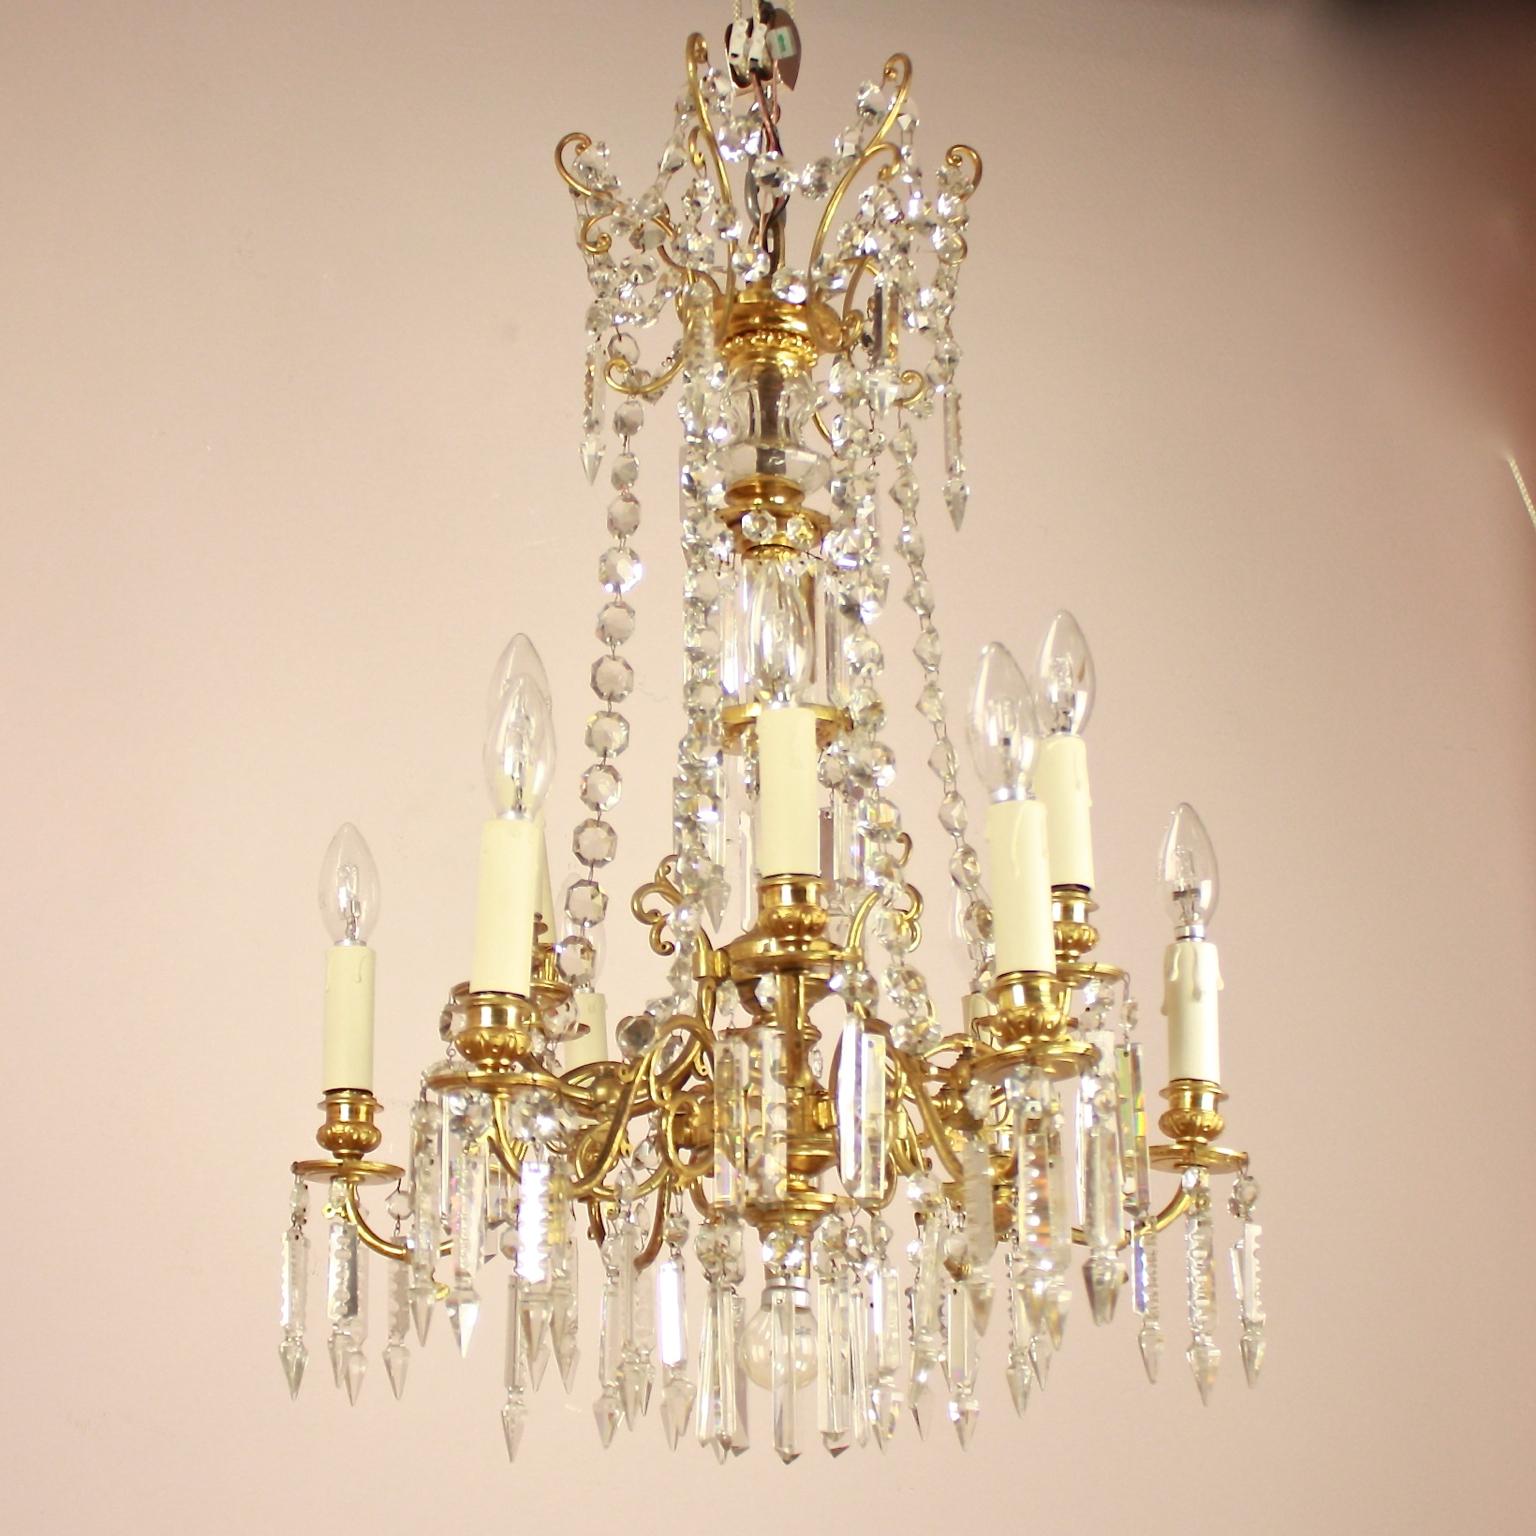 19th Century French Louis XVI Style 12-Light Gilt Bronze Cut Crystal Chandelier 

A converted 12-light gas chandelier, made in France in the 2nd half of the 19th century, also called 'gaselier' featuring gilt bronze scrolling arms on two levels and